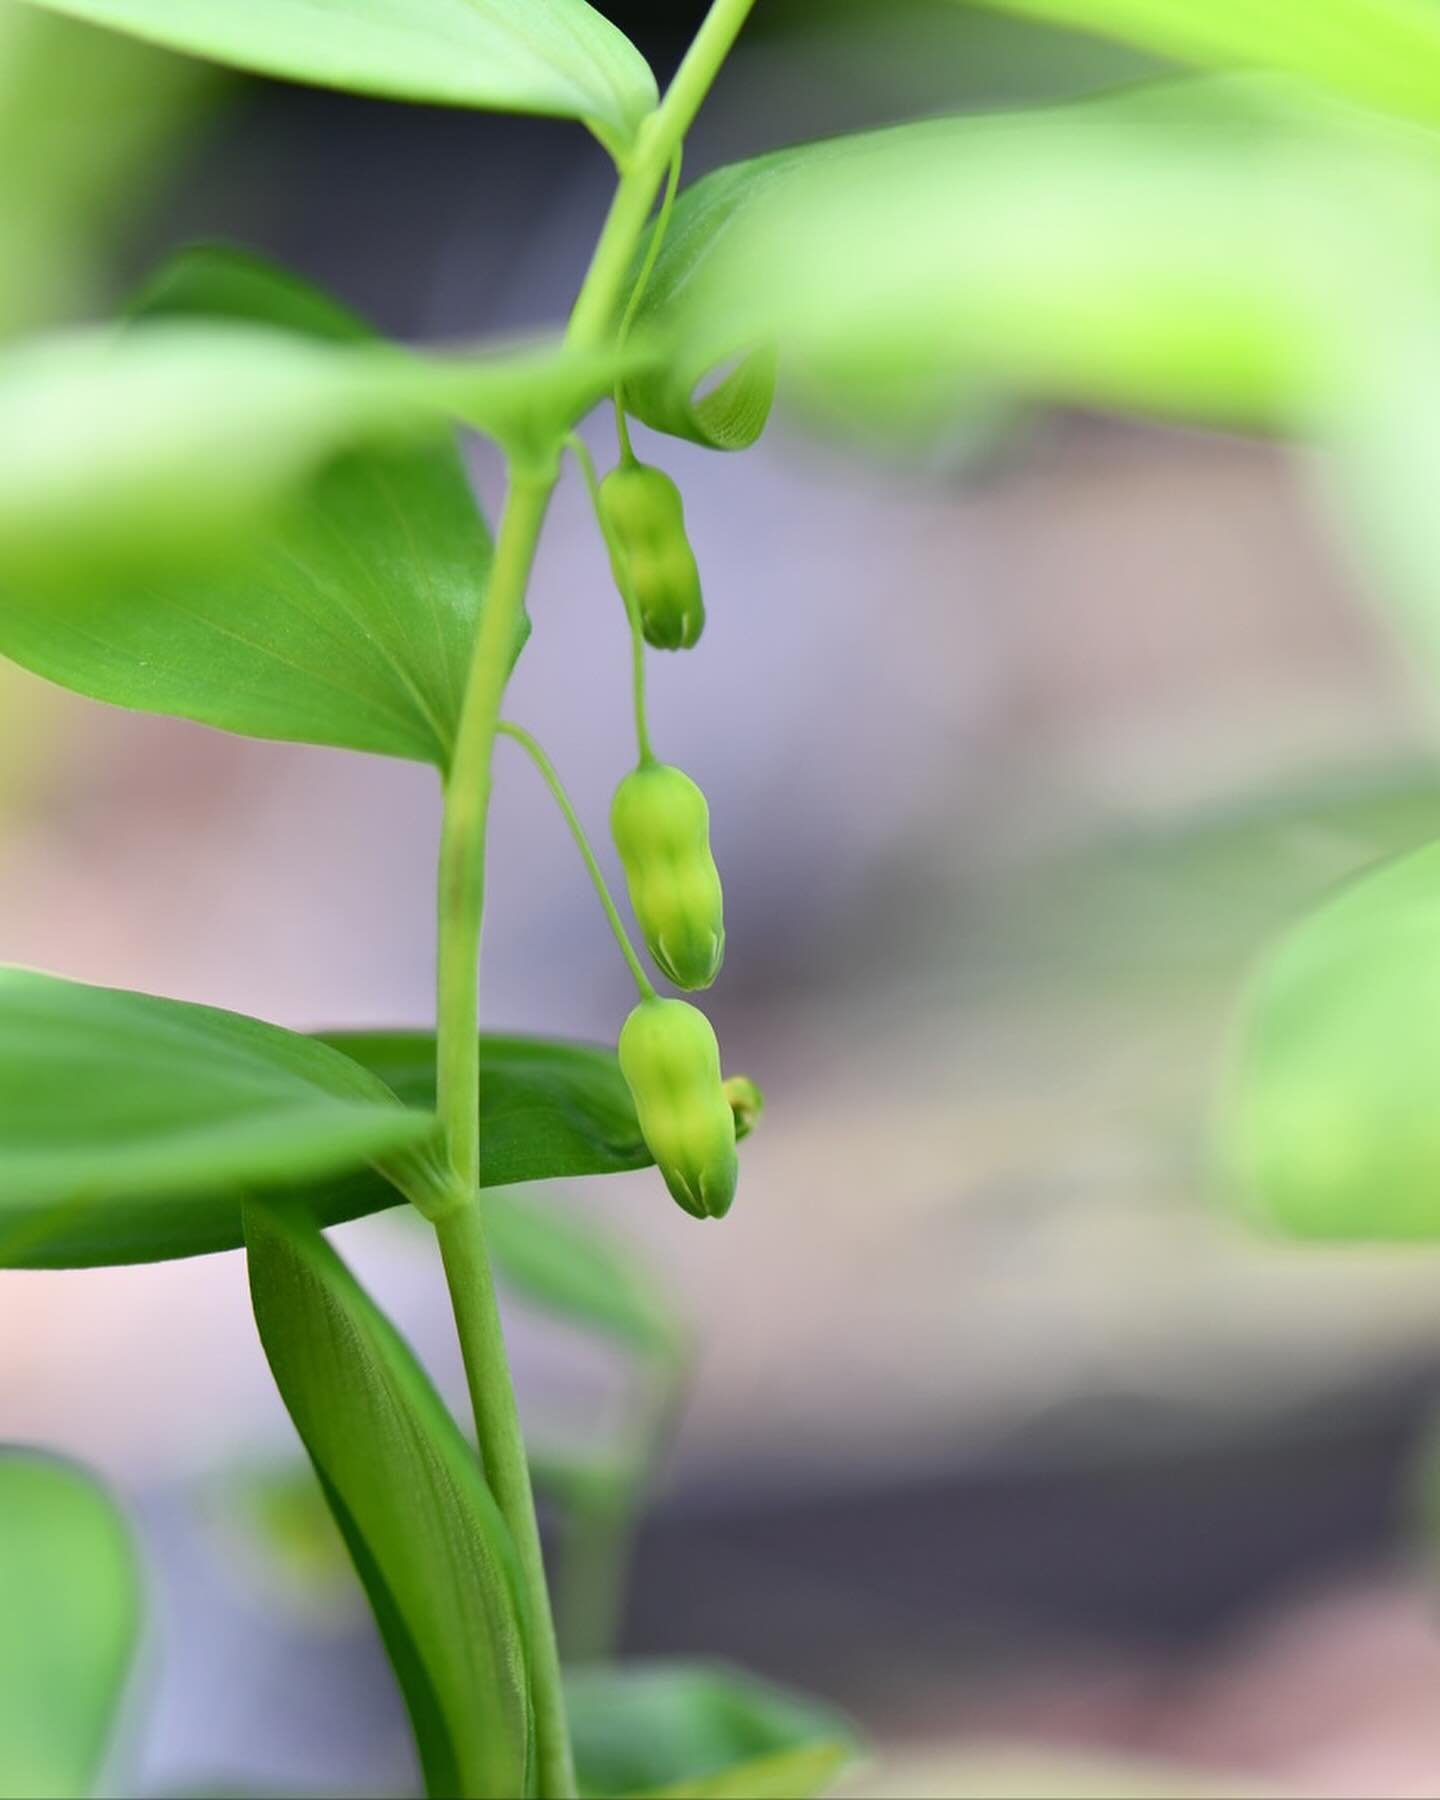 Solomon&rsquo;s Seal is a woodland plant that can be found in moist woods.  It can also be found in drier areas like oak-hickory forests.  It has long oval-shaped leaves with rounded tips that alternate up the stem.  Flowers can be seen by looking be